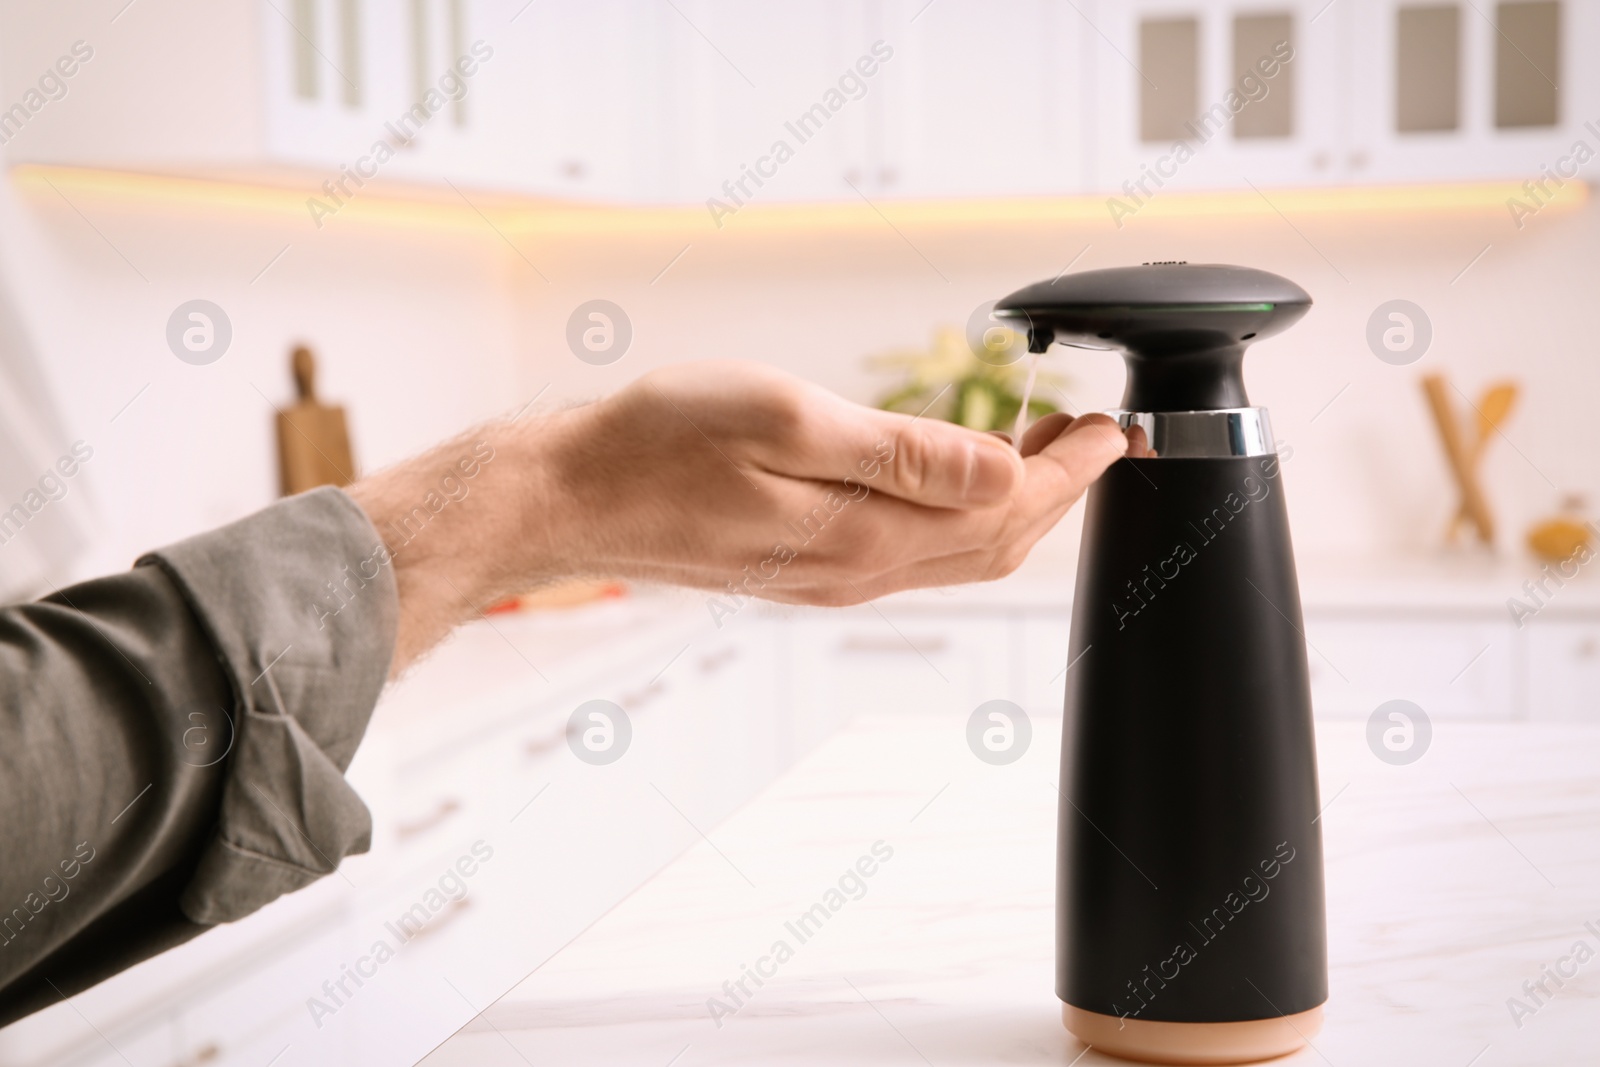 Photo of Man using automatic soap dispenser in kitchen, closeup